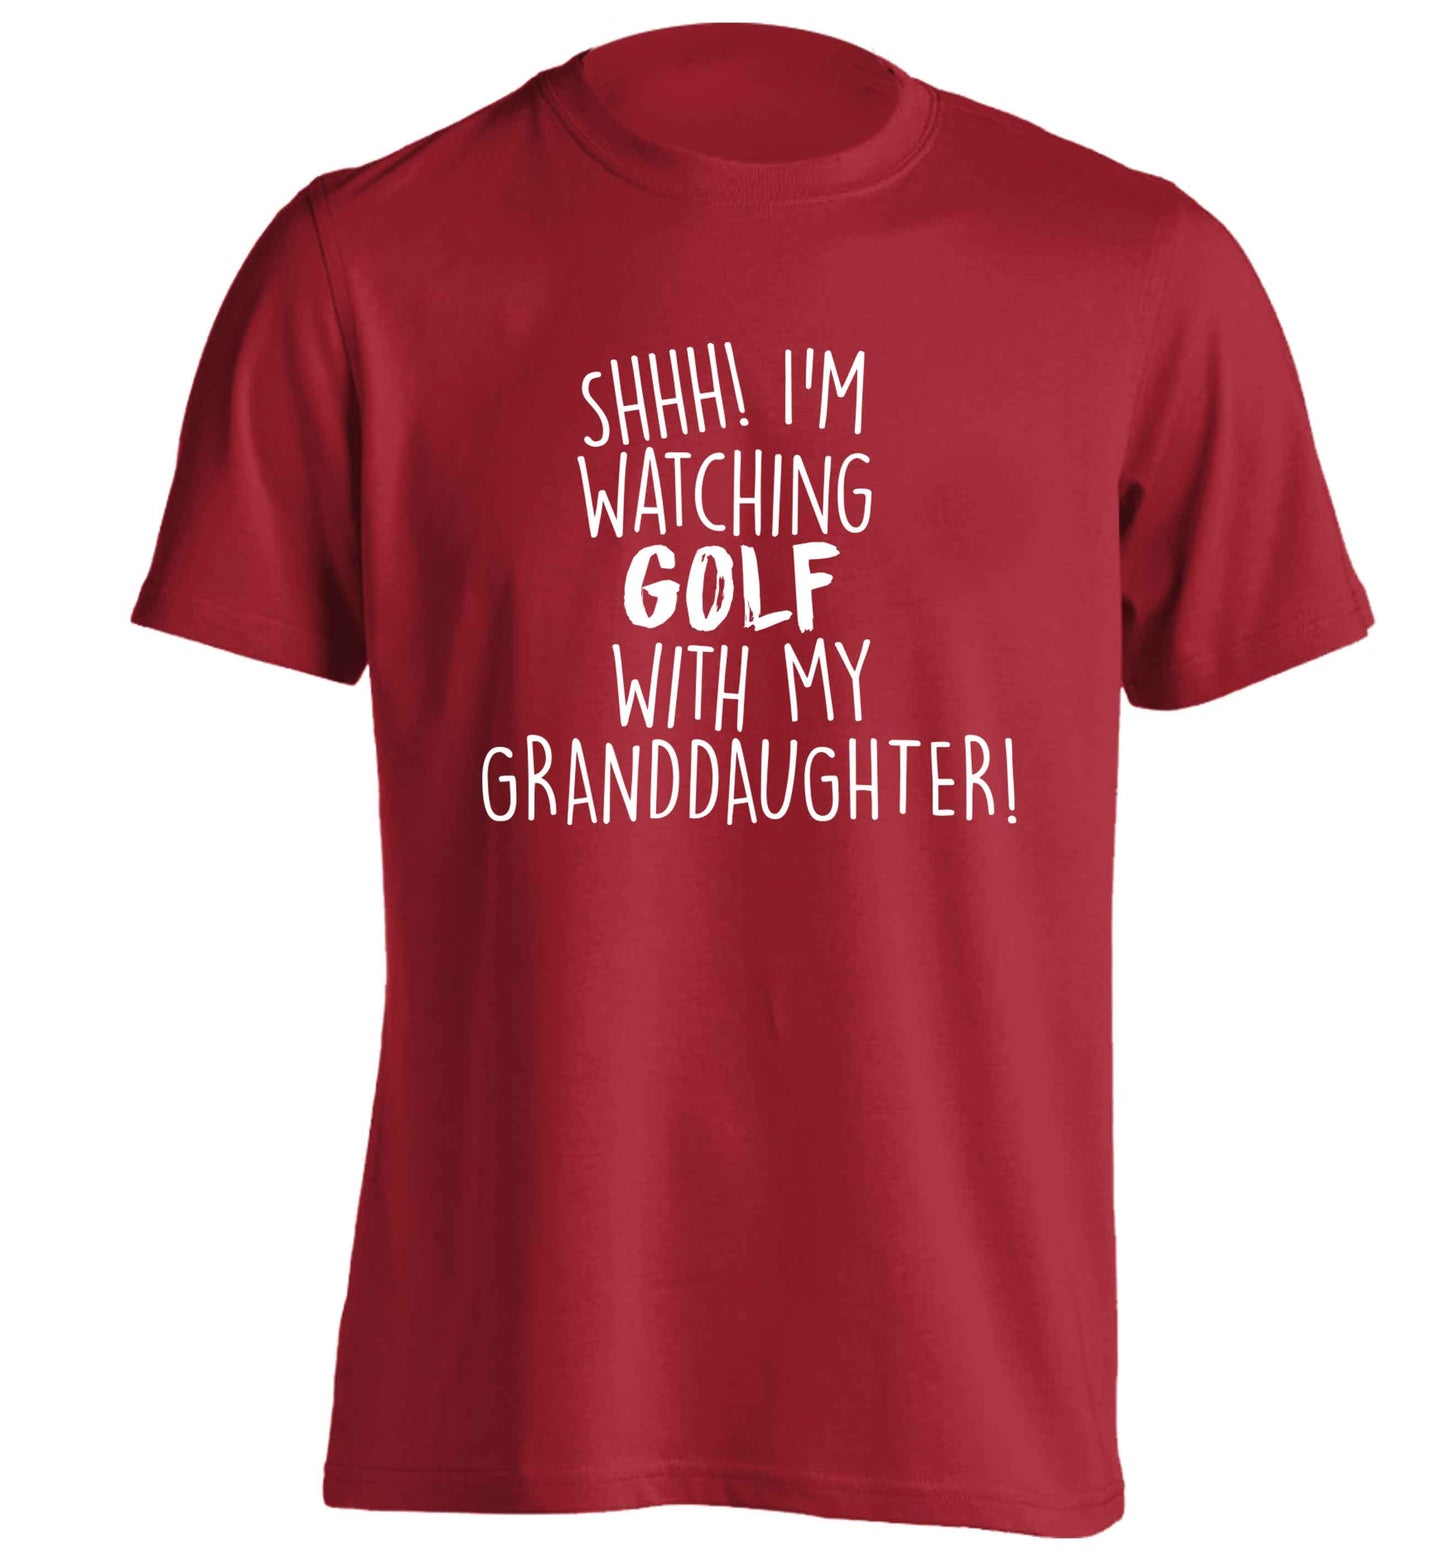 Shh I'm watching golf with my granddaughter adults unisex red Tshirt 2XL